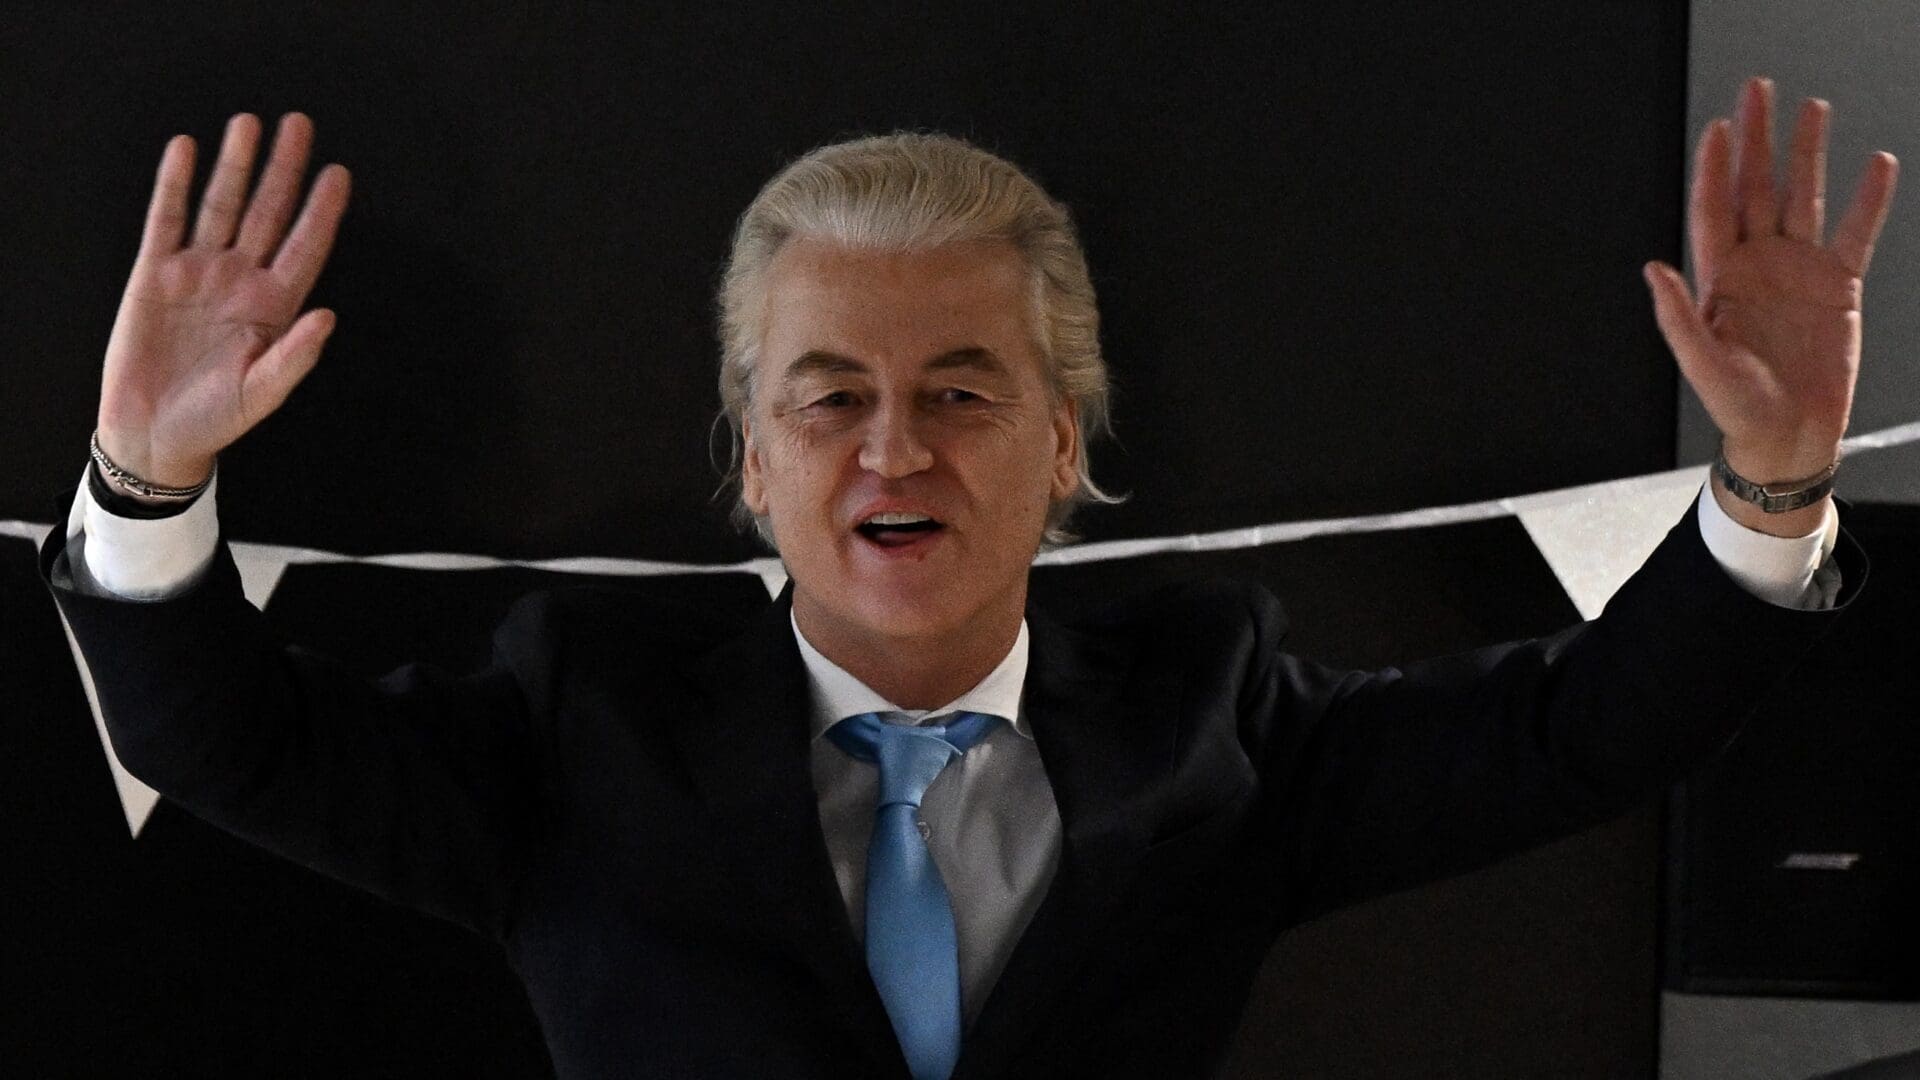 A triumphant Wilders waves waves as he arrives at a post-election meeting at the Nieuwspoort conference centre in The Hague on 23 November 2023.